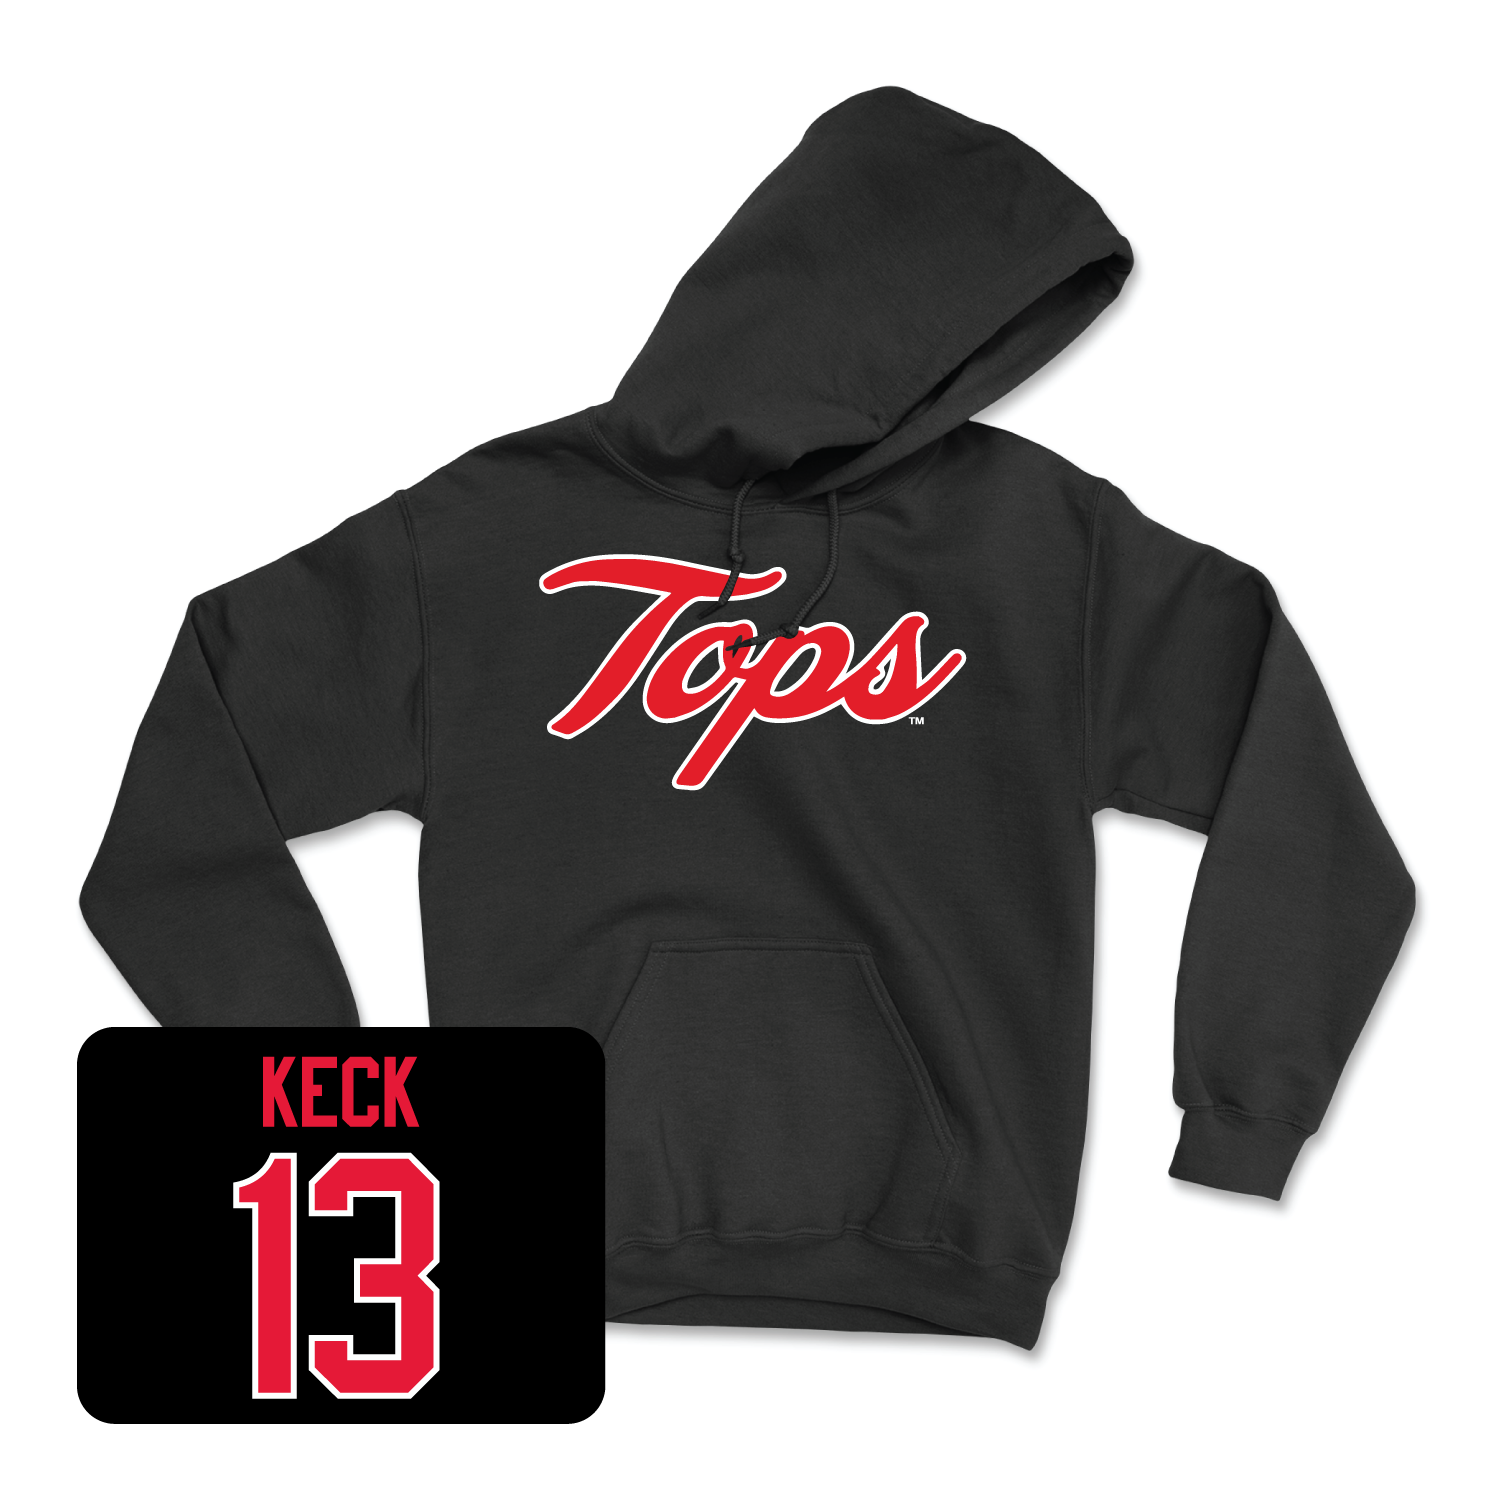 Black Women's Volleyball Tops Hoodie X-Large / Shannon Keck | #13